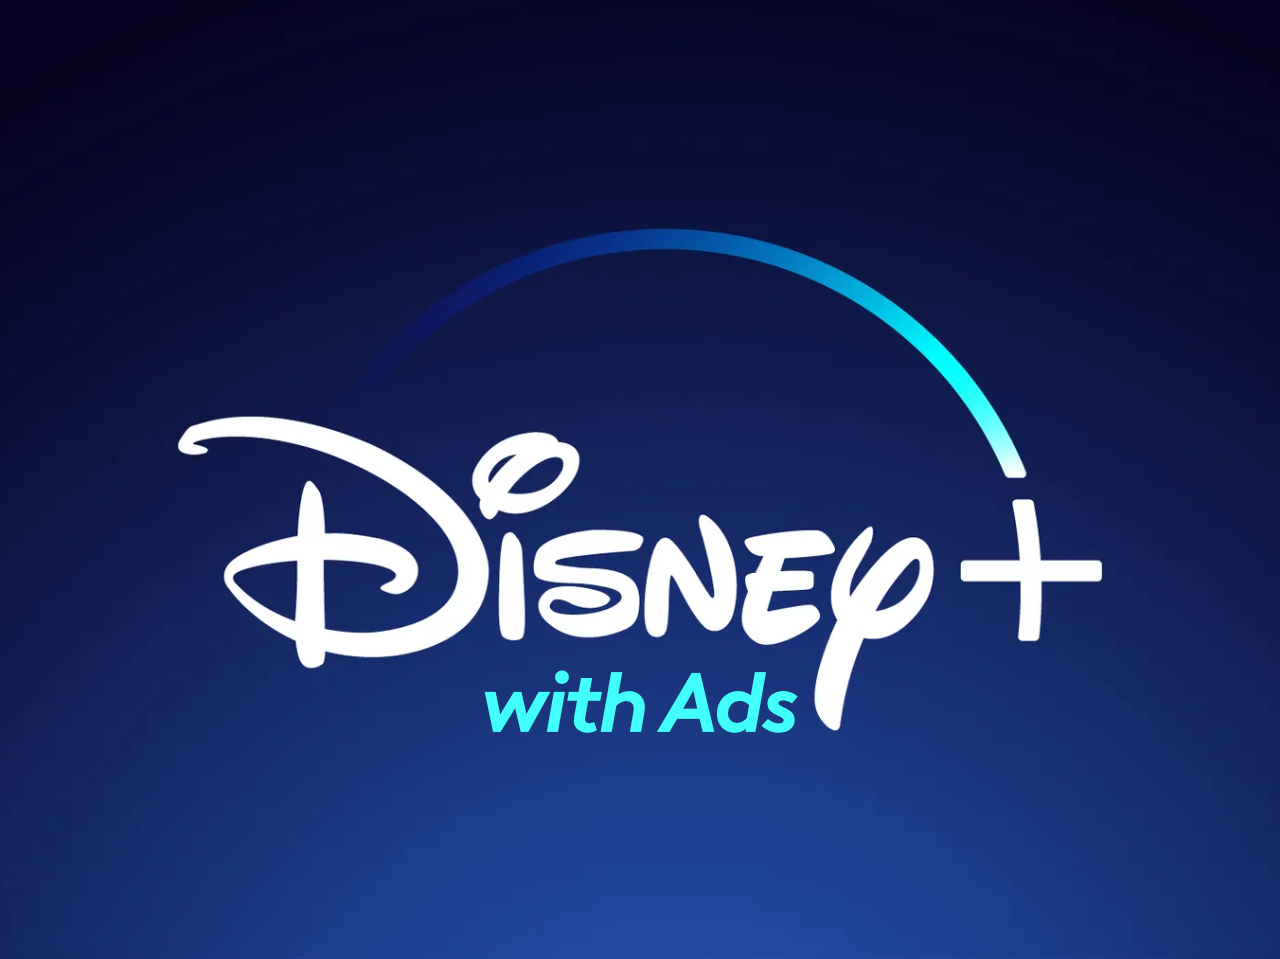 Disney Plus plans to offer a cheaper ad-supported subscription tier this year